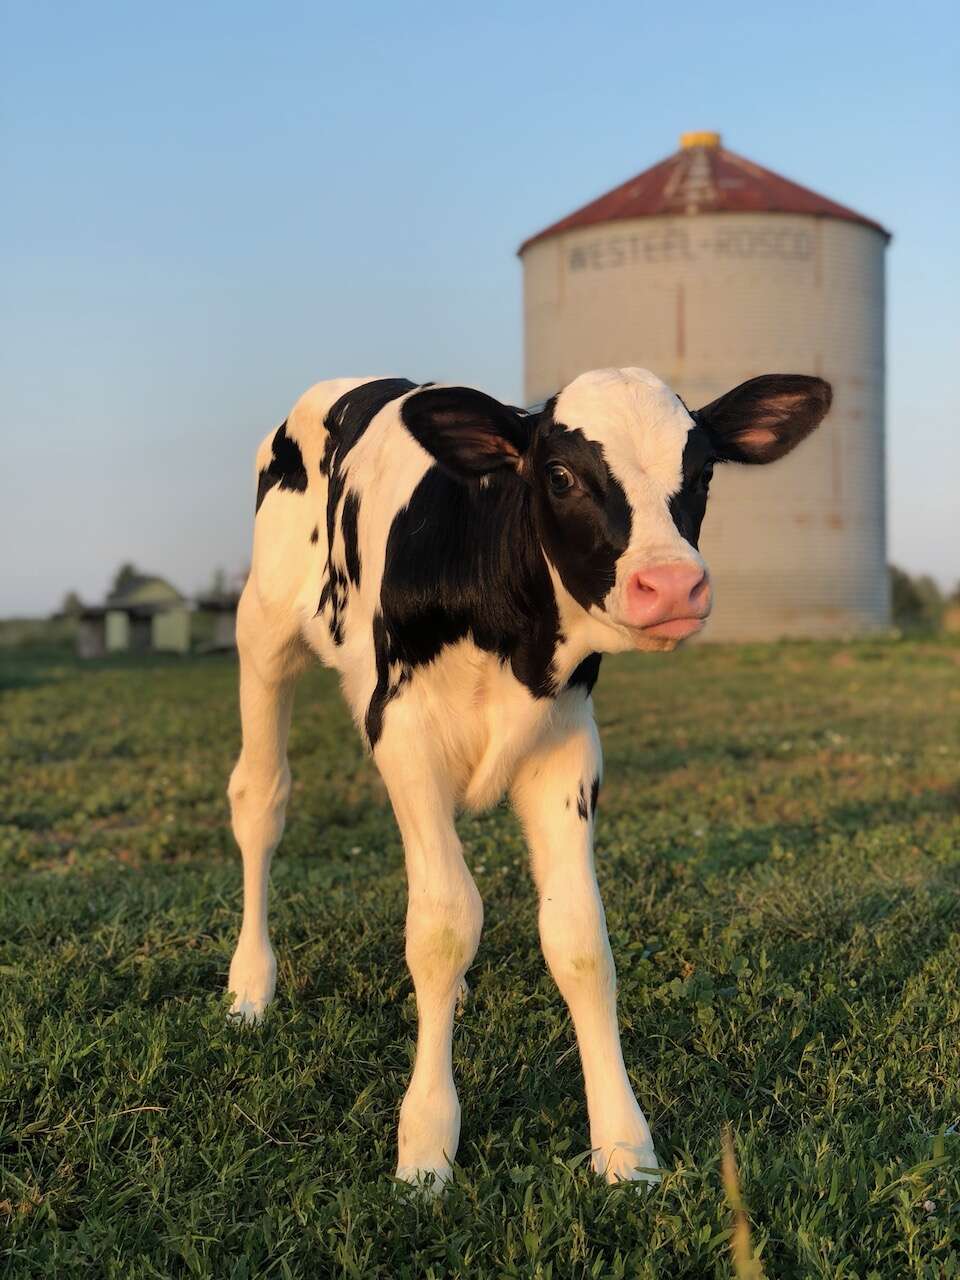 Calf saved from dairy farm